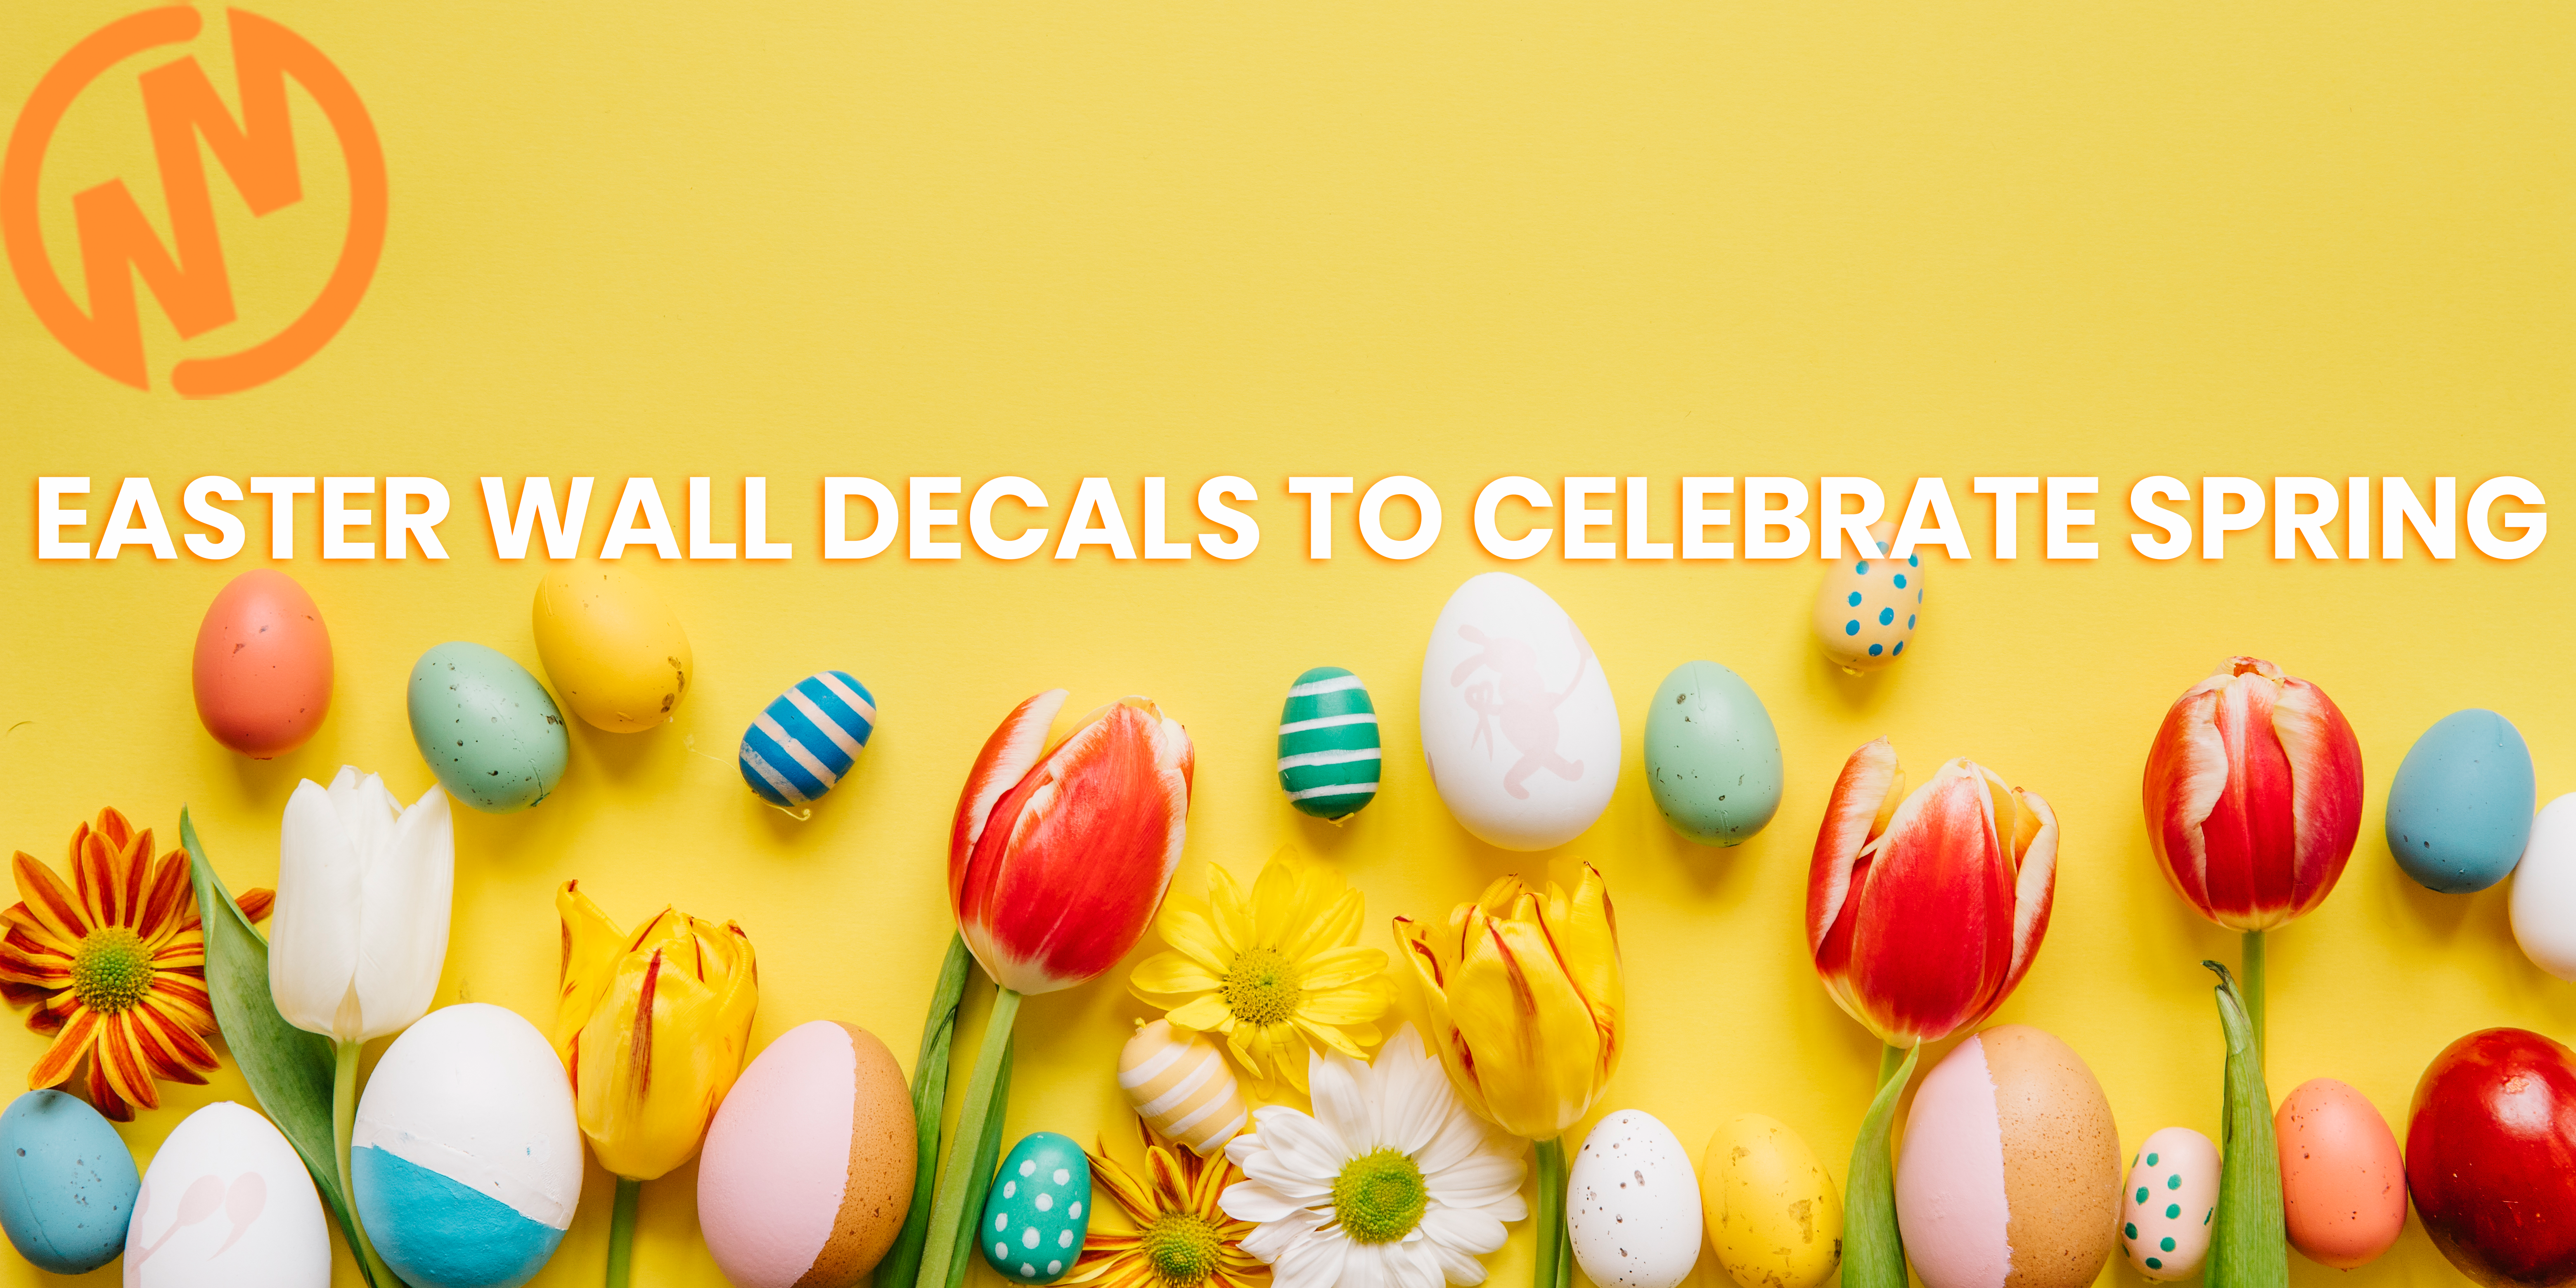 9 Easter Wall Decals to Celebrate Spring